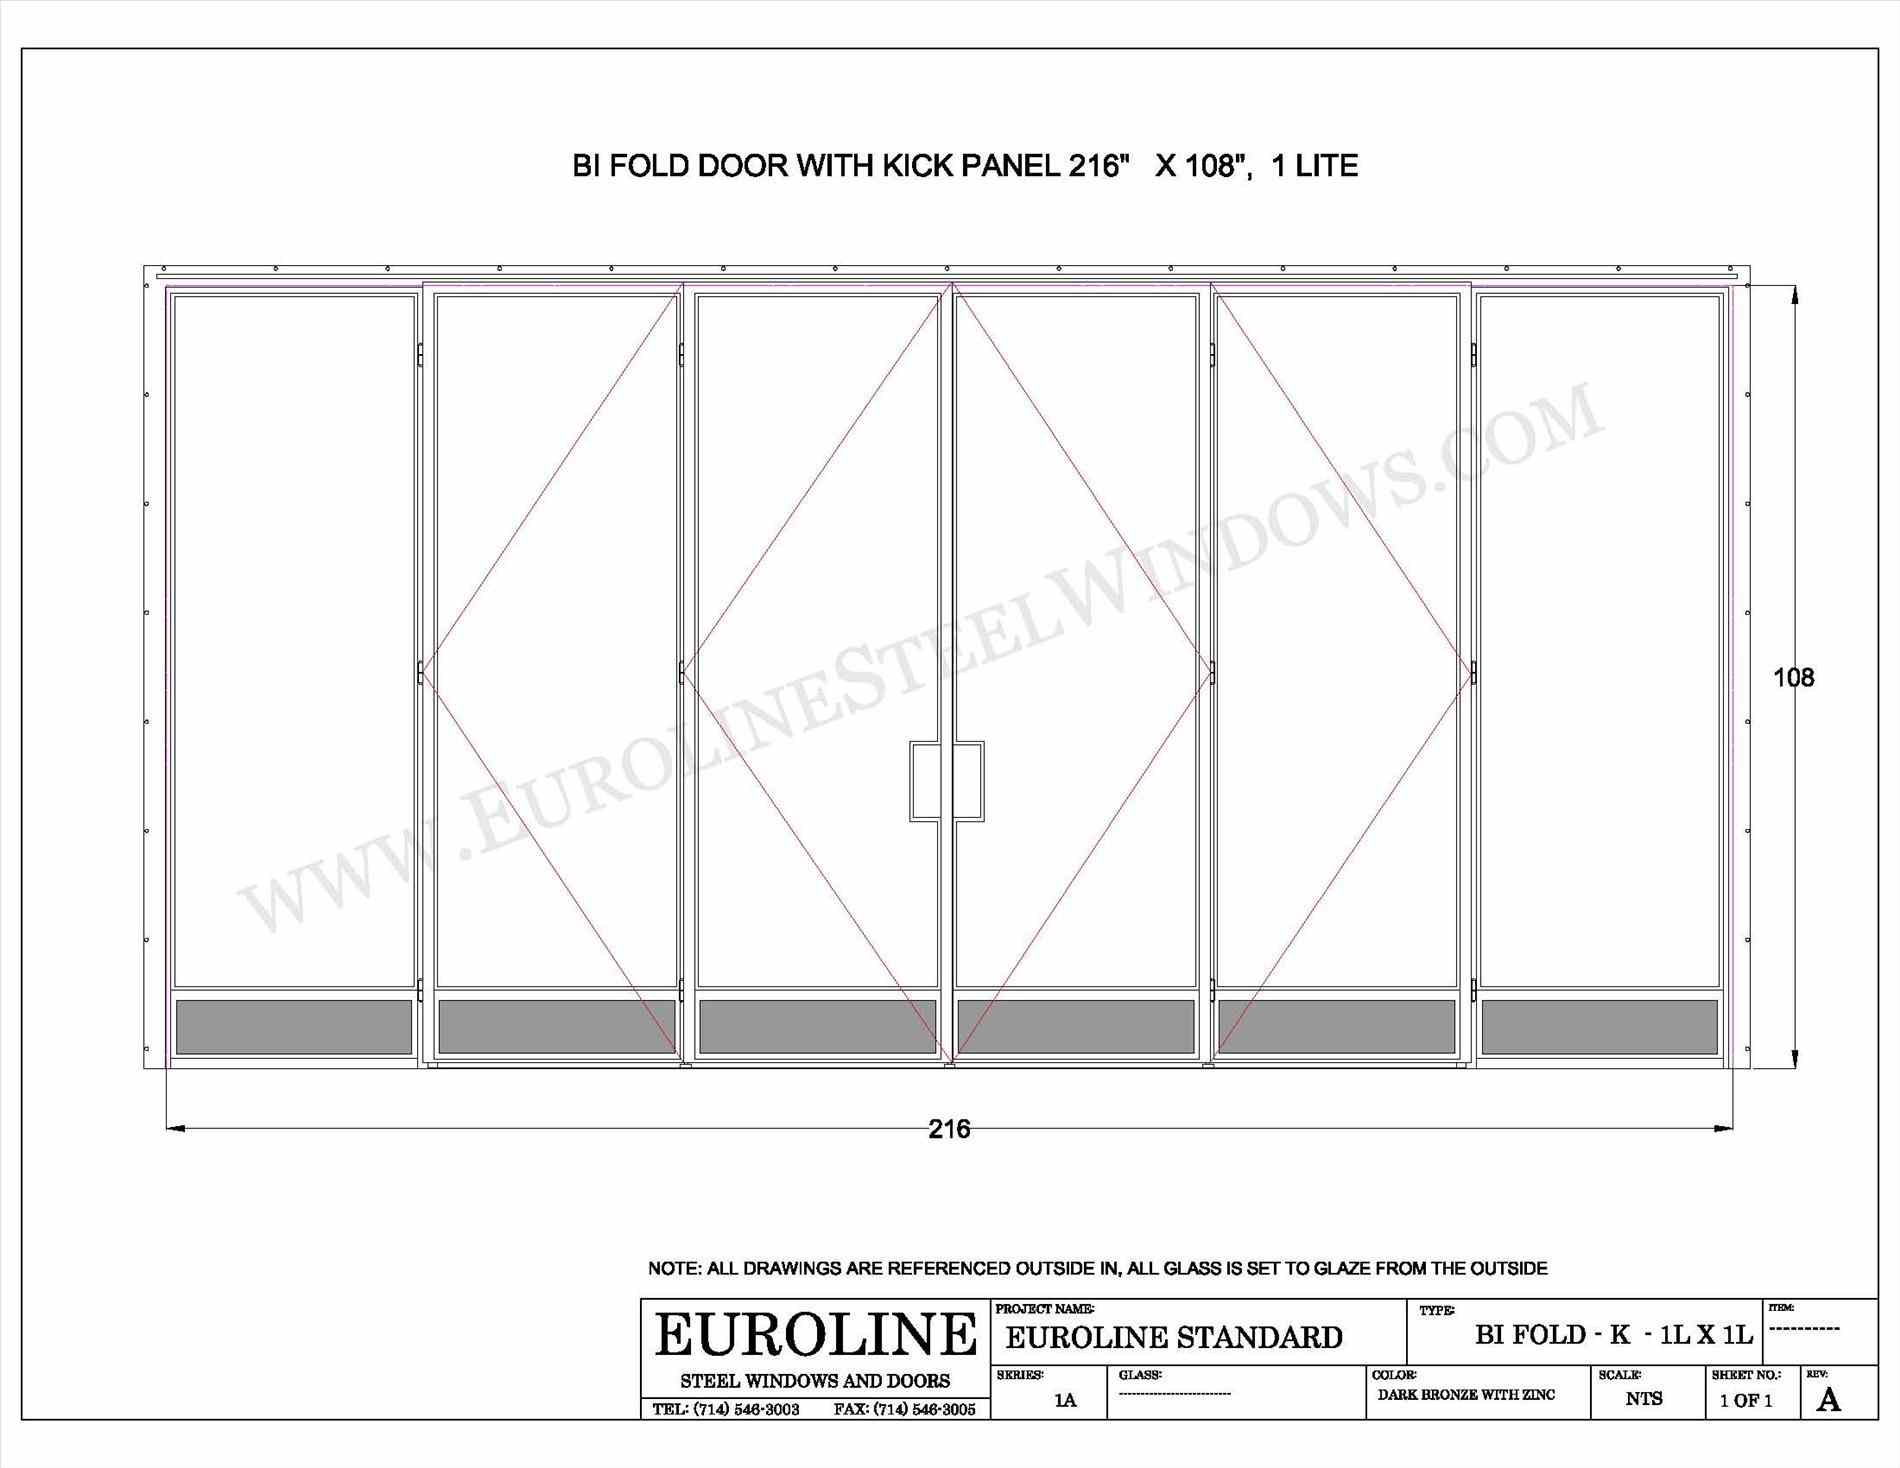  Sliding  Door  Elevation Drawing at PaintingValley com 